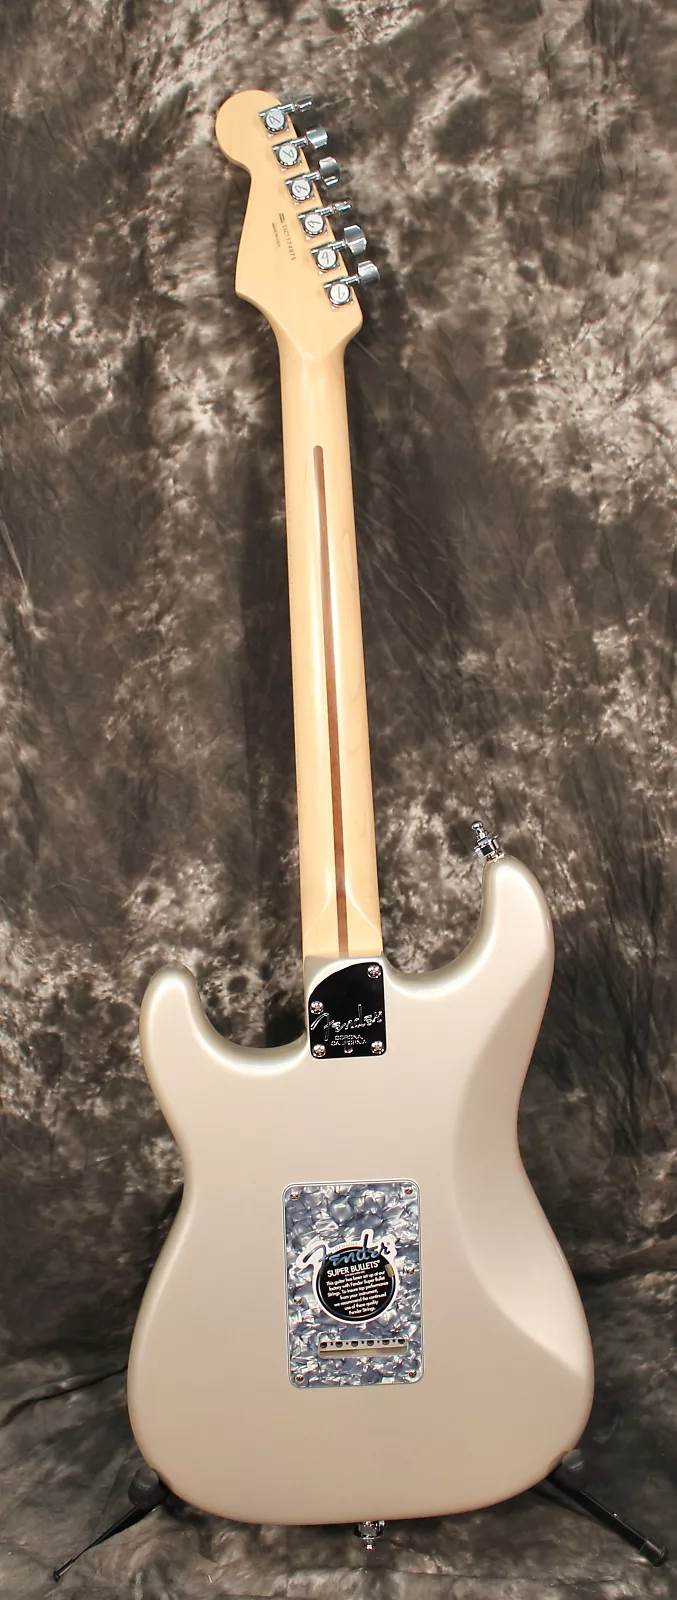 American Deluxe Stratocaster - Second Series - FUZZFACED